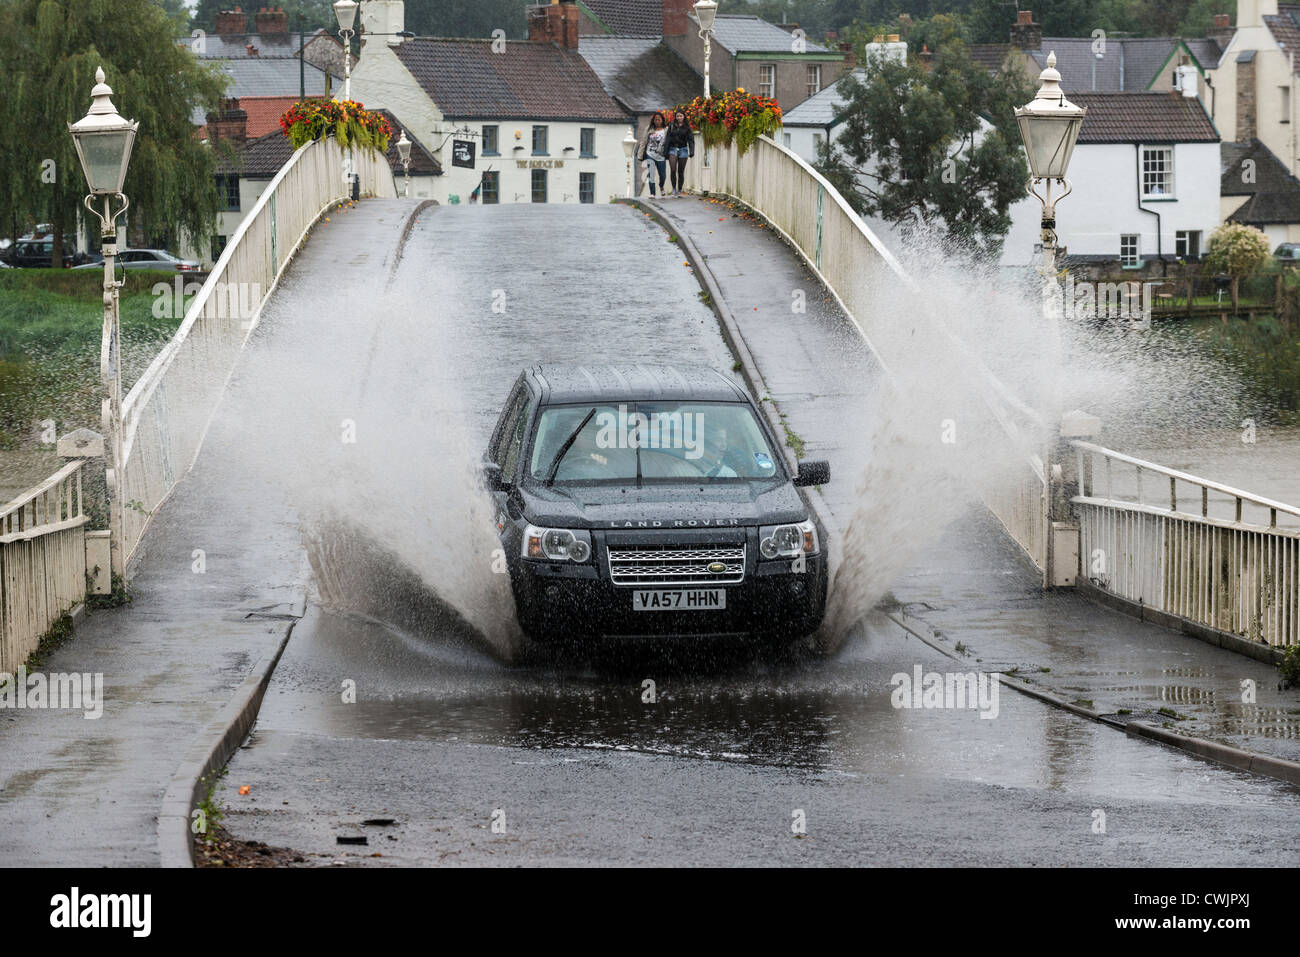 RANGE ROVER IN FLOOD ON OLD WYE BRIDGE CHEPSTOW SUMMER 2012. THE BRIDGE FORMS PART OF THE BORDER BETWEEN ENGLAND & WALES. Stock Photo